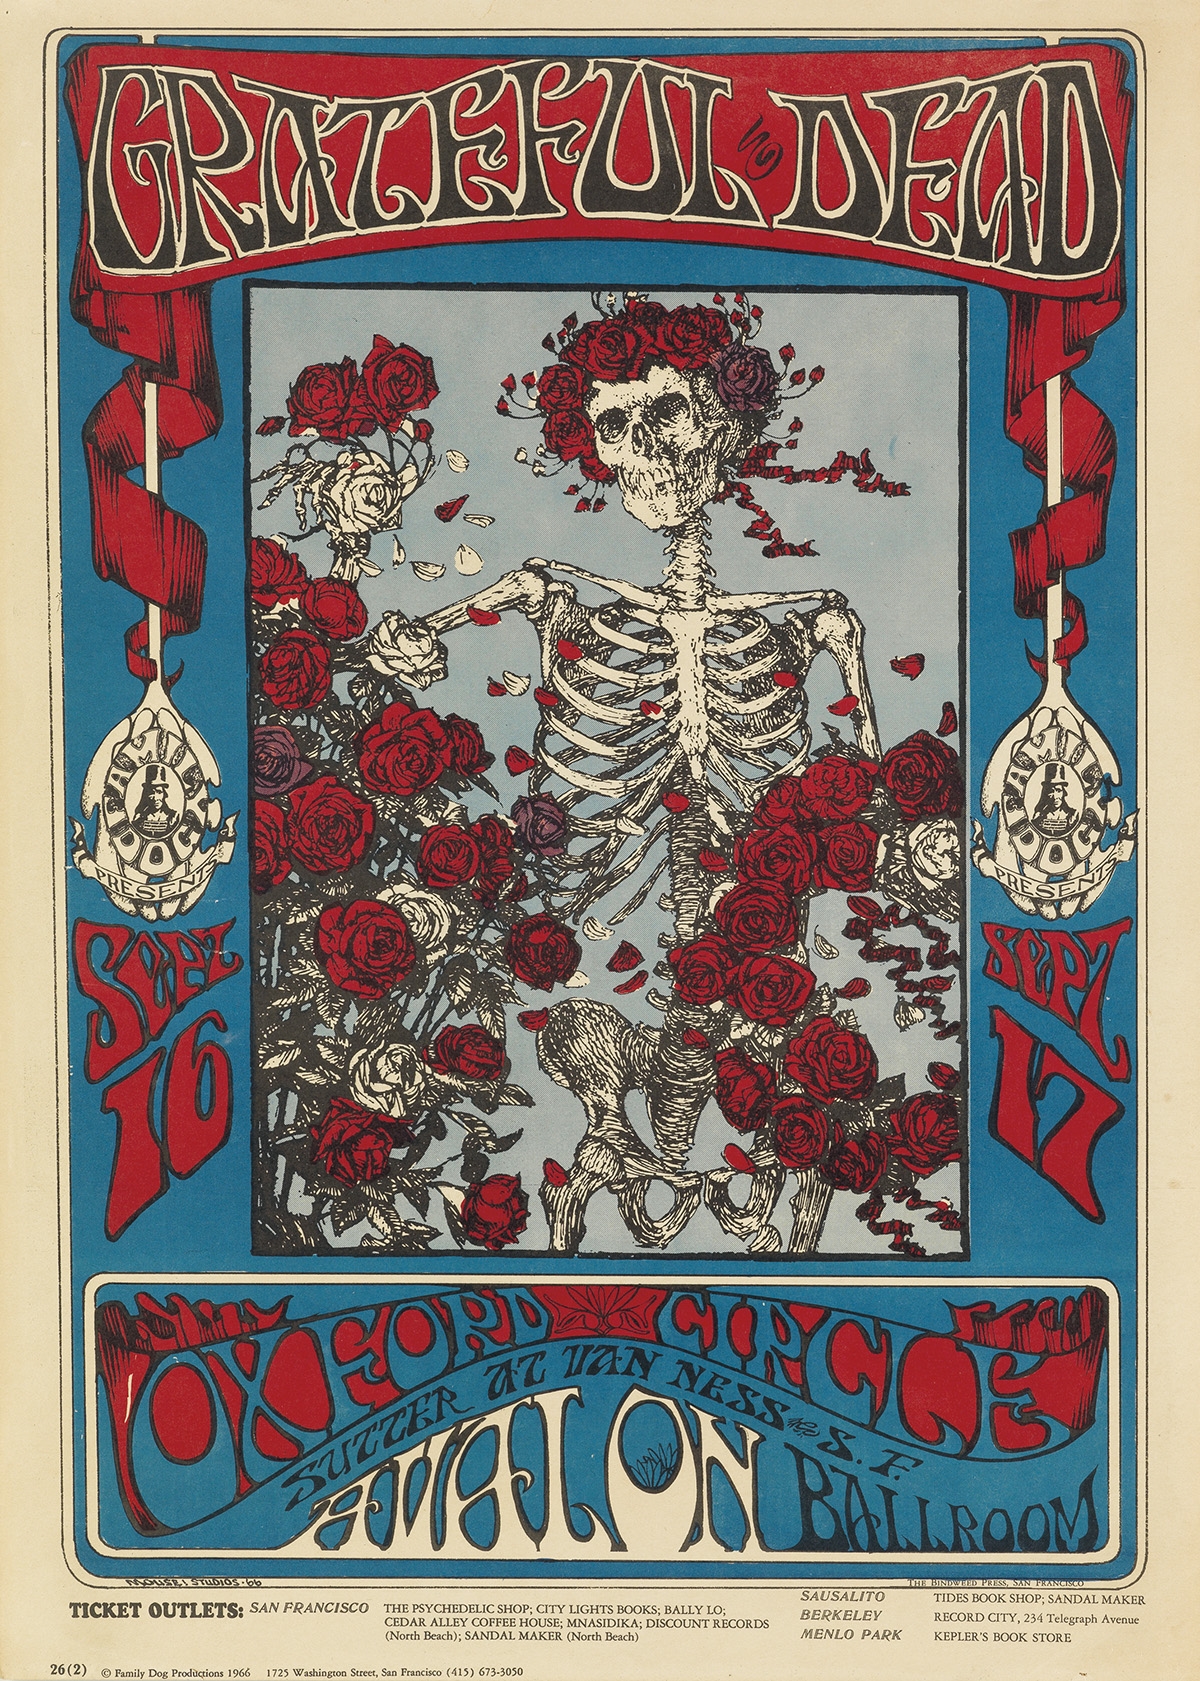 Stanley Mouse, The Family Dog Presents Grateful Dead and Oxford Circle at  the Avalon Ballroom (1966)